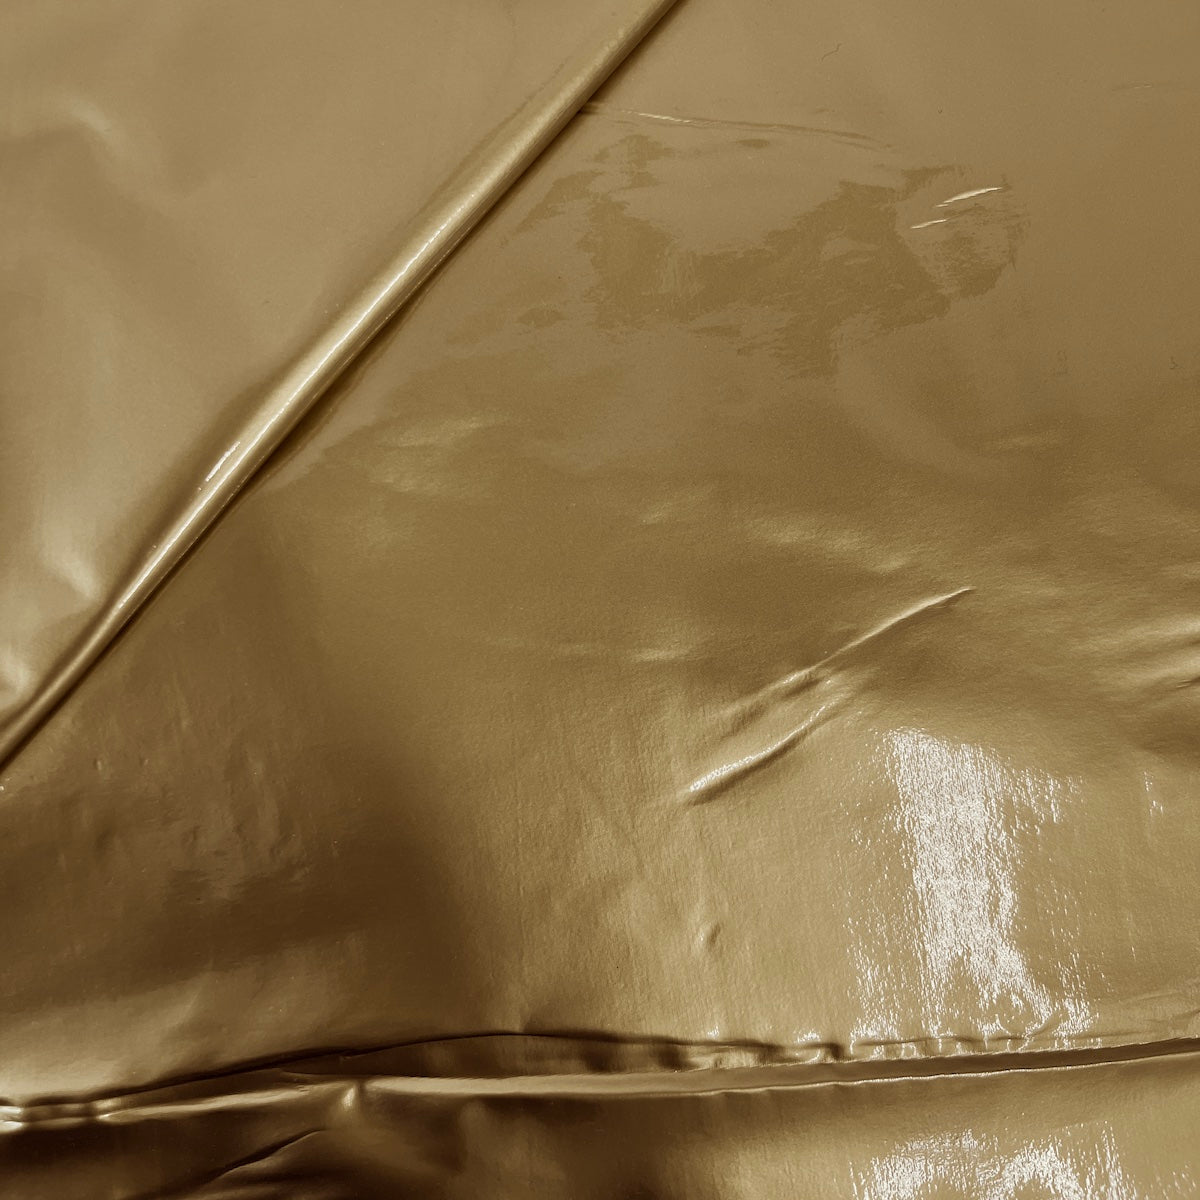 Gold Faux Patent Leather Apparel Vinyl Fabric